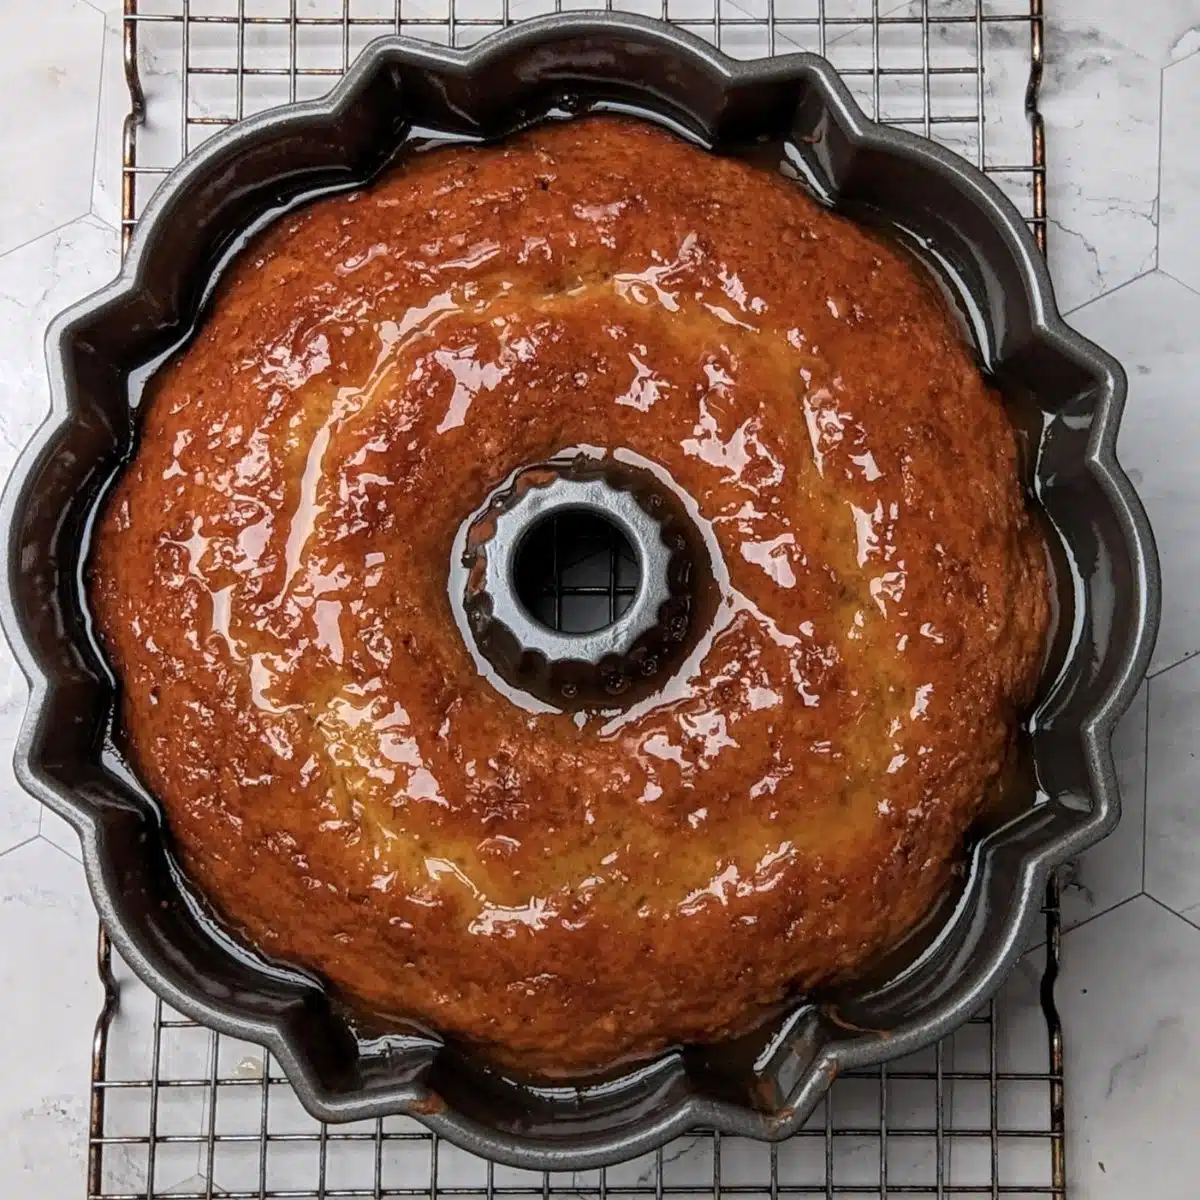 Glazed whiskey cake in the pan.